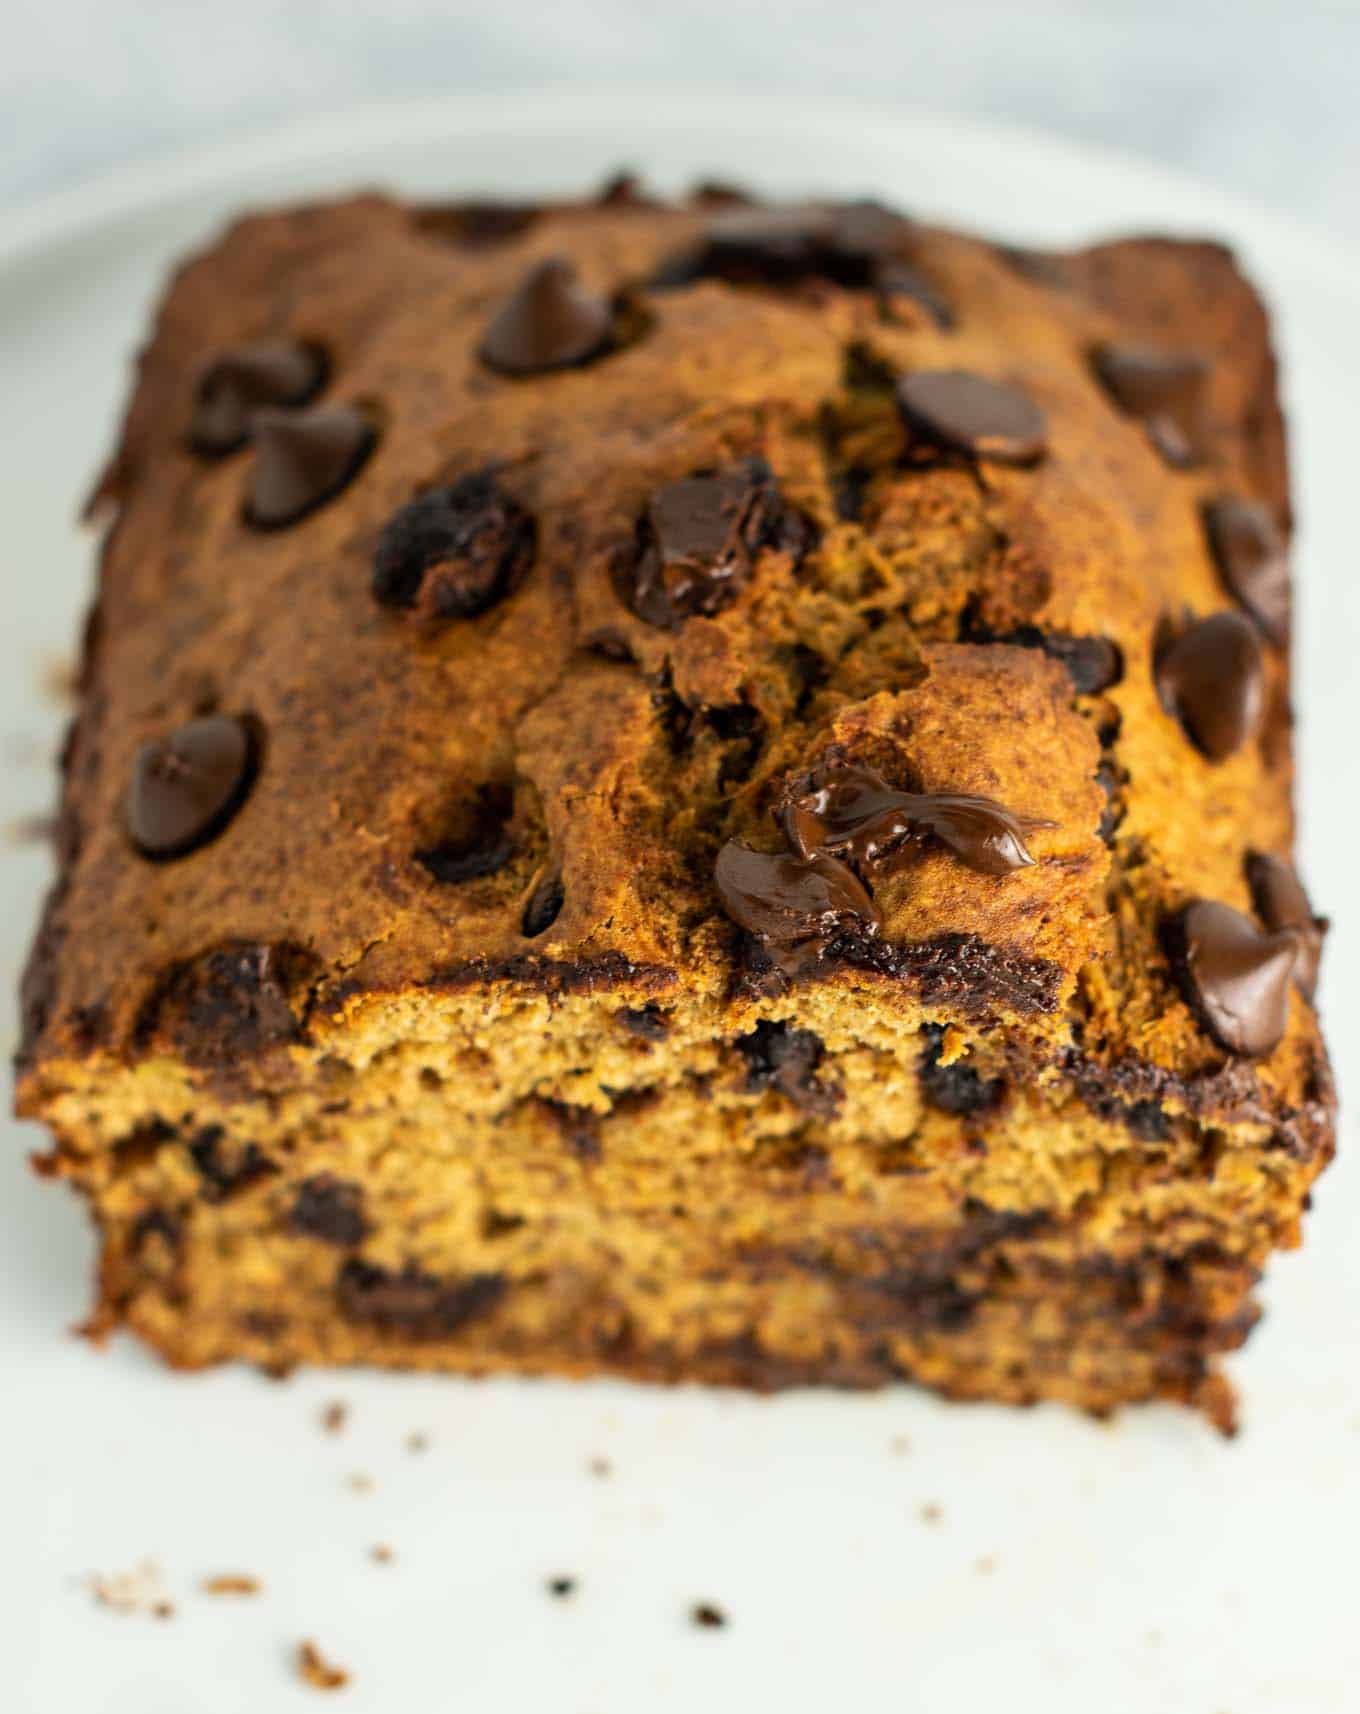 The BEST chocolate chip banana bread – full of wholesome ingredients and NO OIL or dairy! Everyone loves it when I bake this! #wholewheat #bananabreaad 